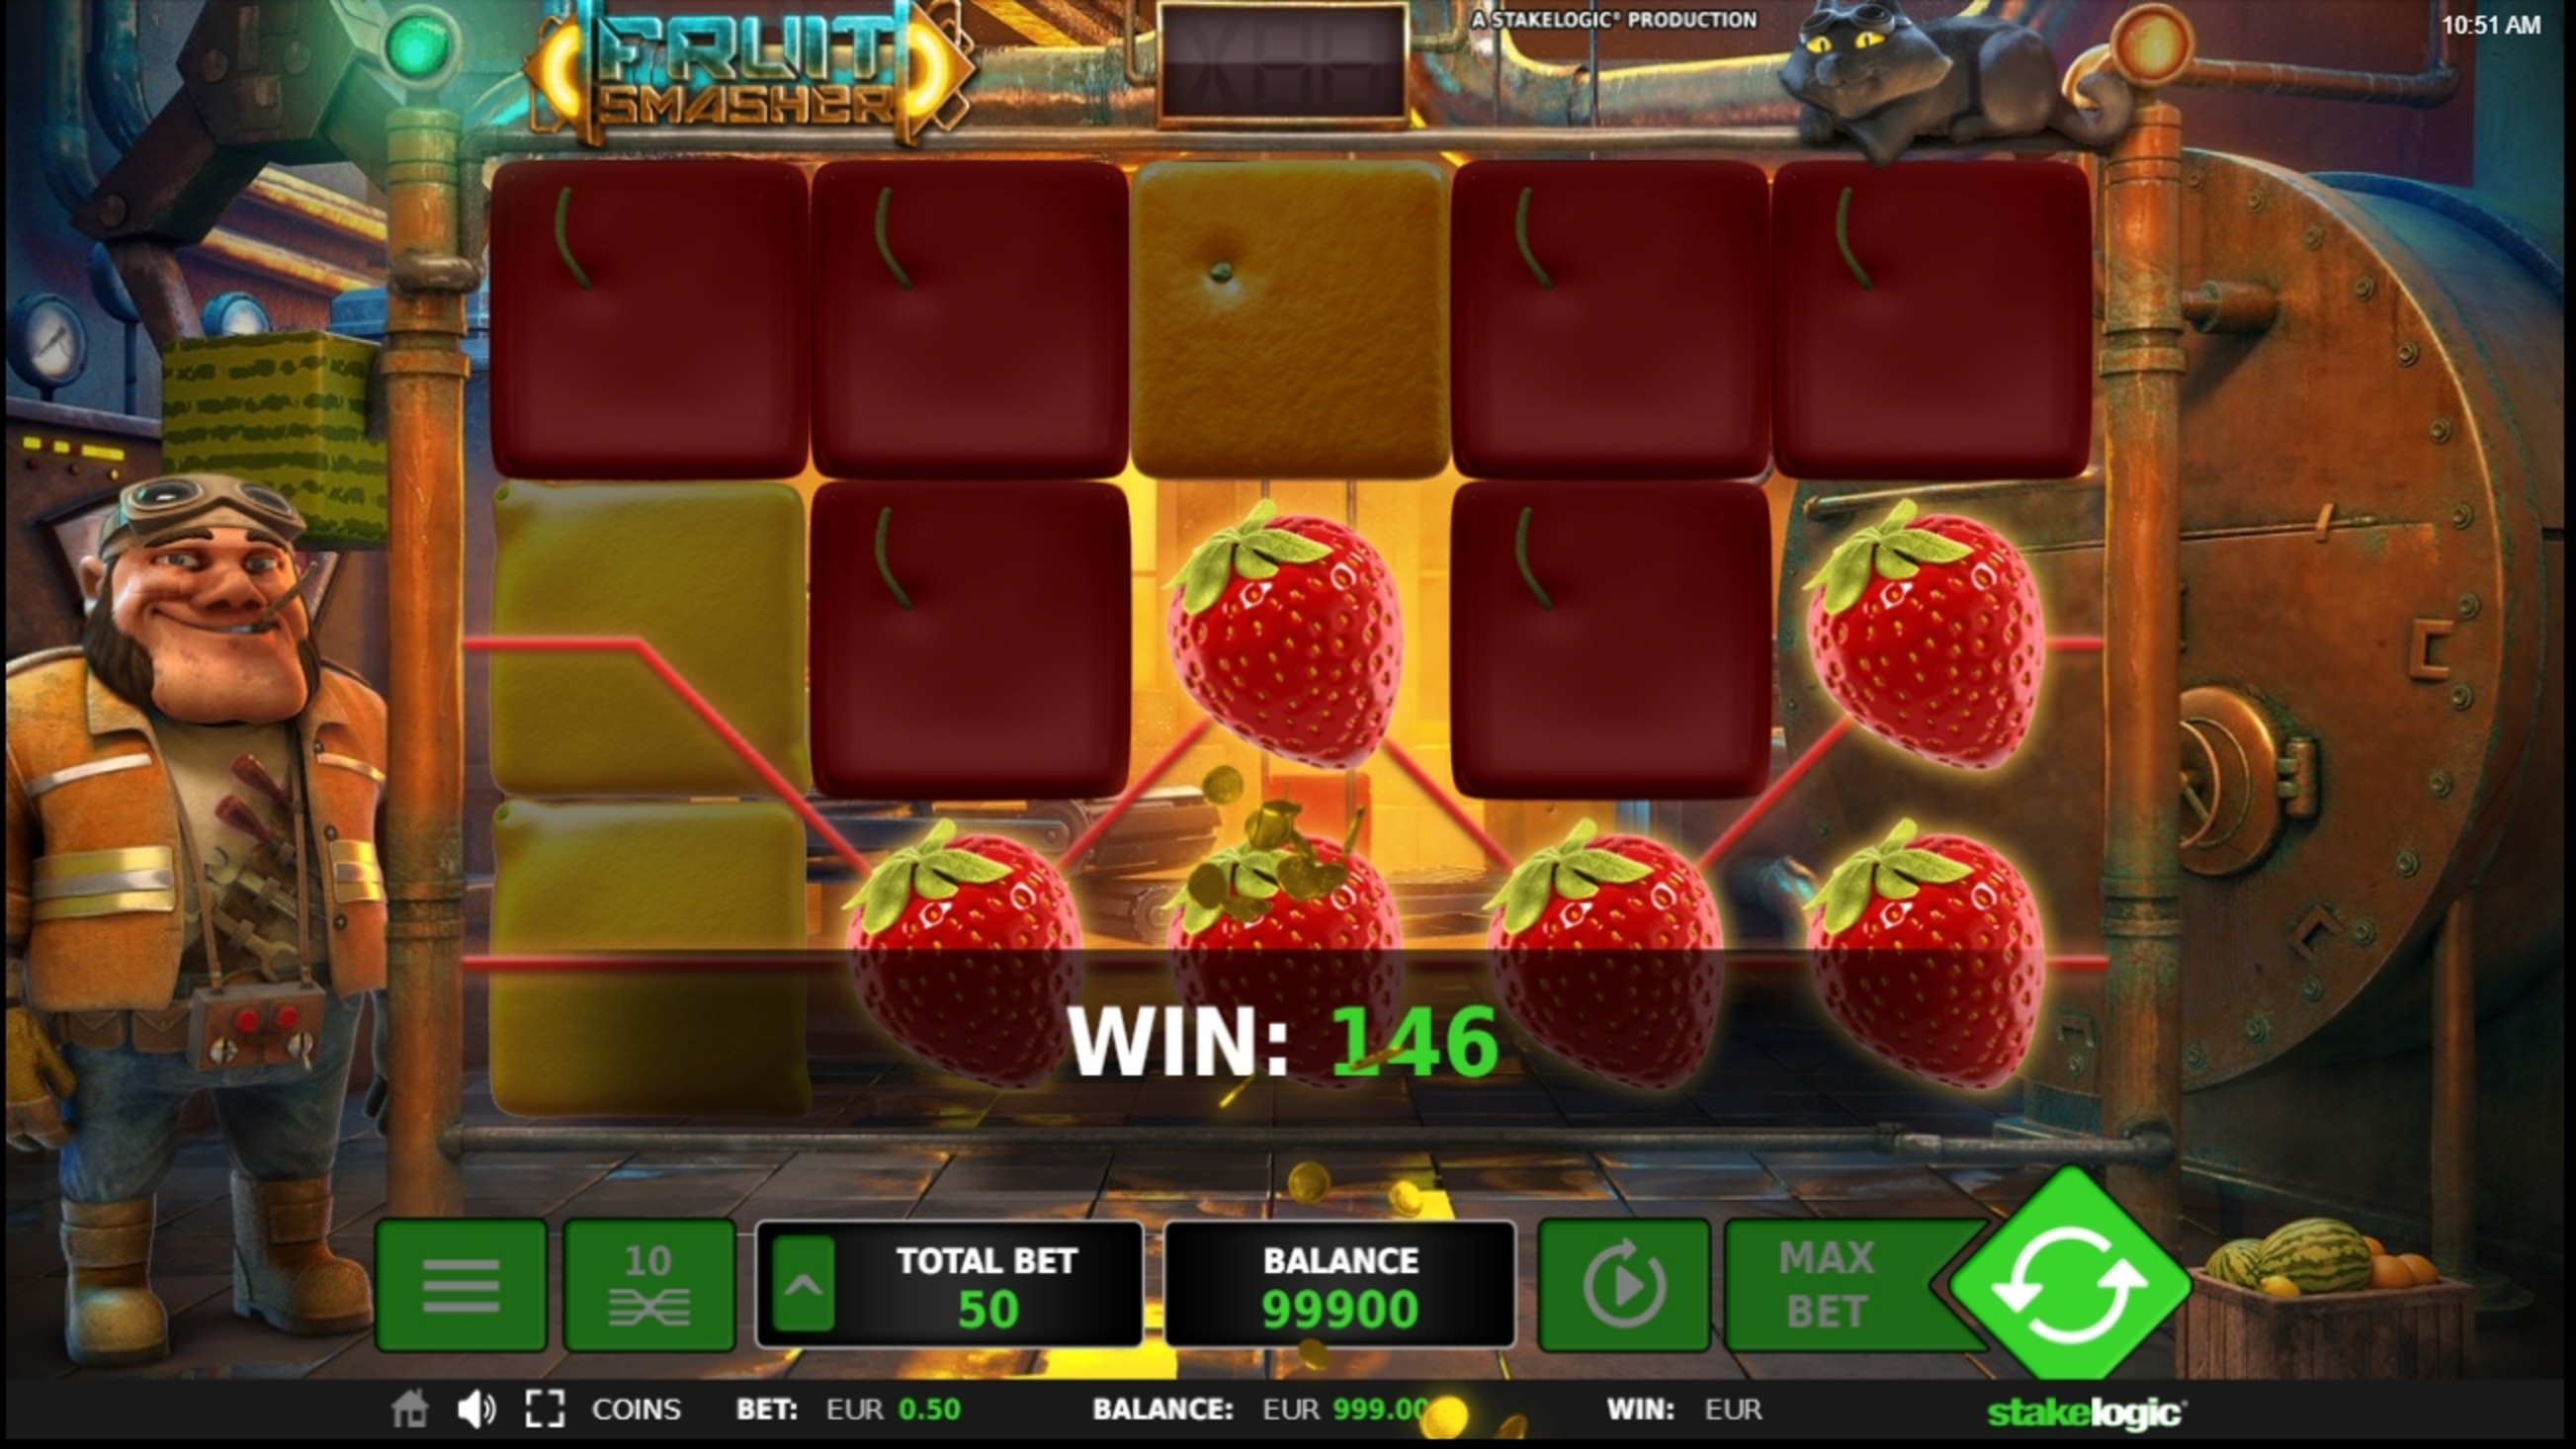 Win Money in Fruit Smasher Free Slot Game by Stakelogic